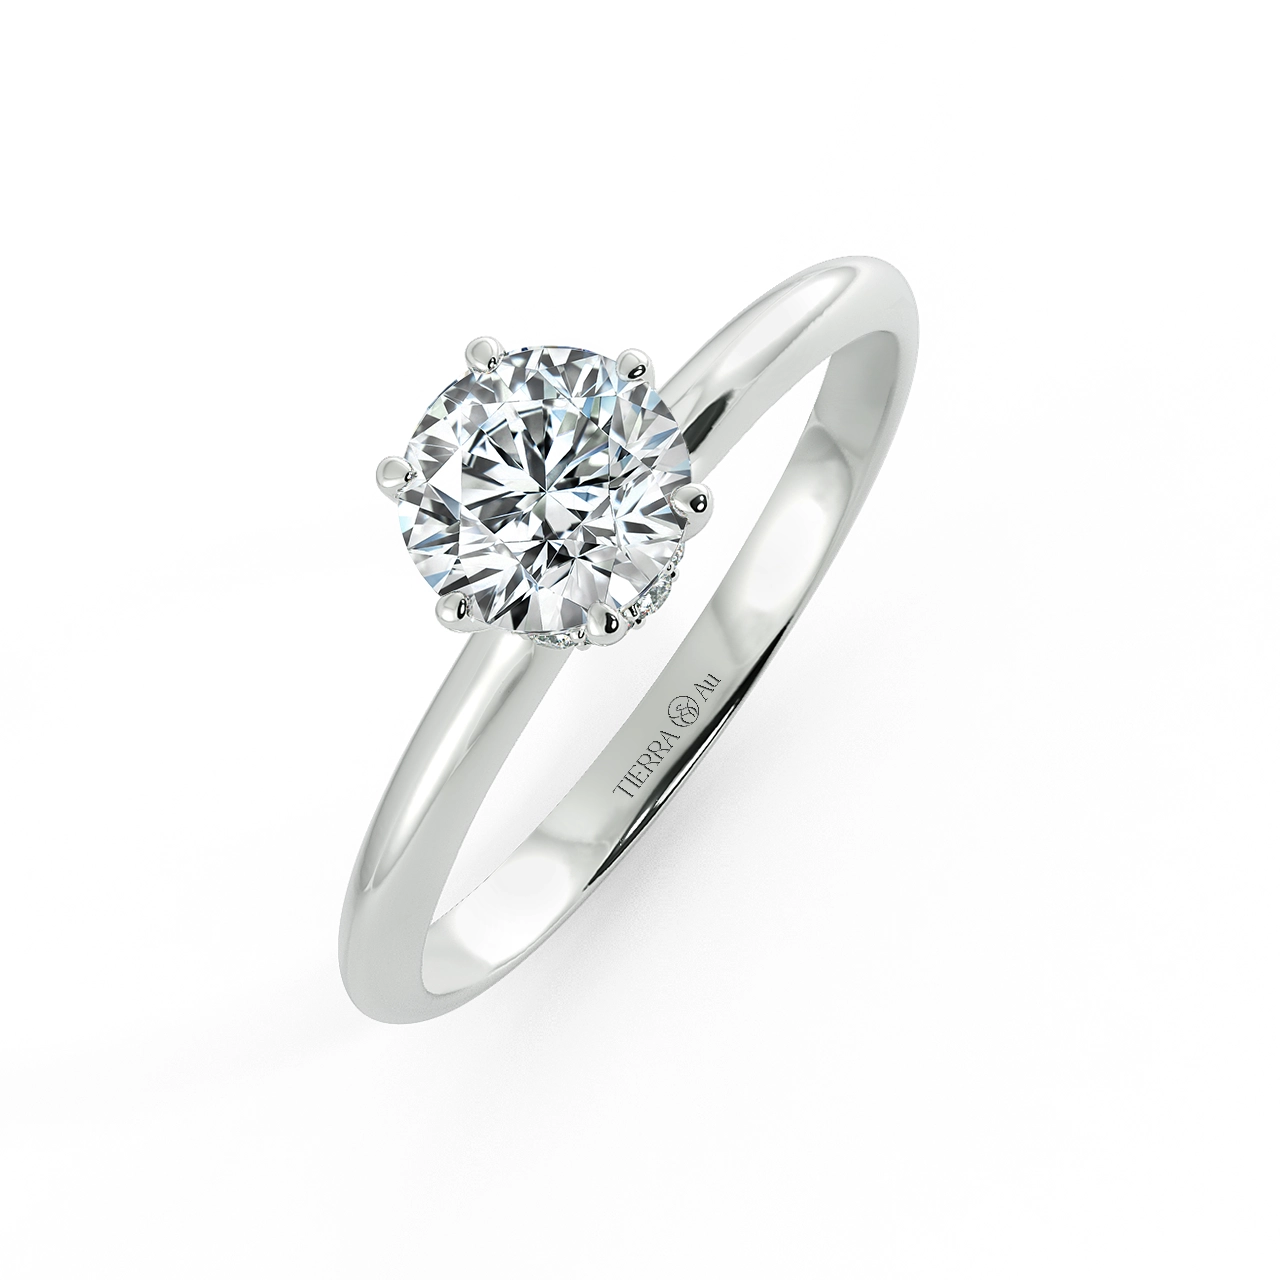 Solitaire Engagement Ring With Diamond Bezel Setting NCH1303 3